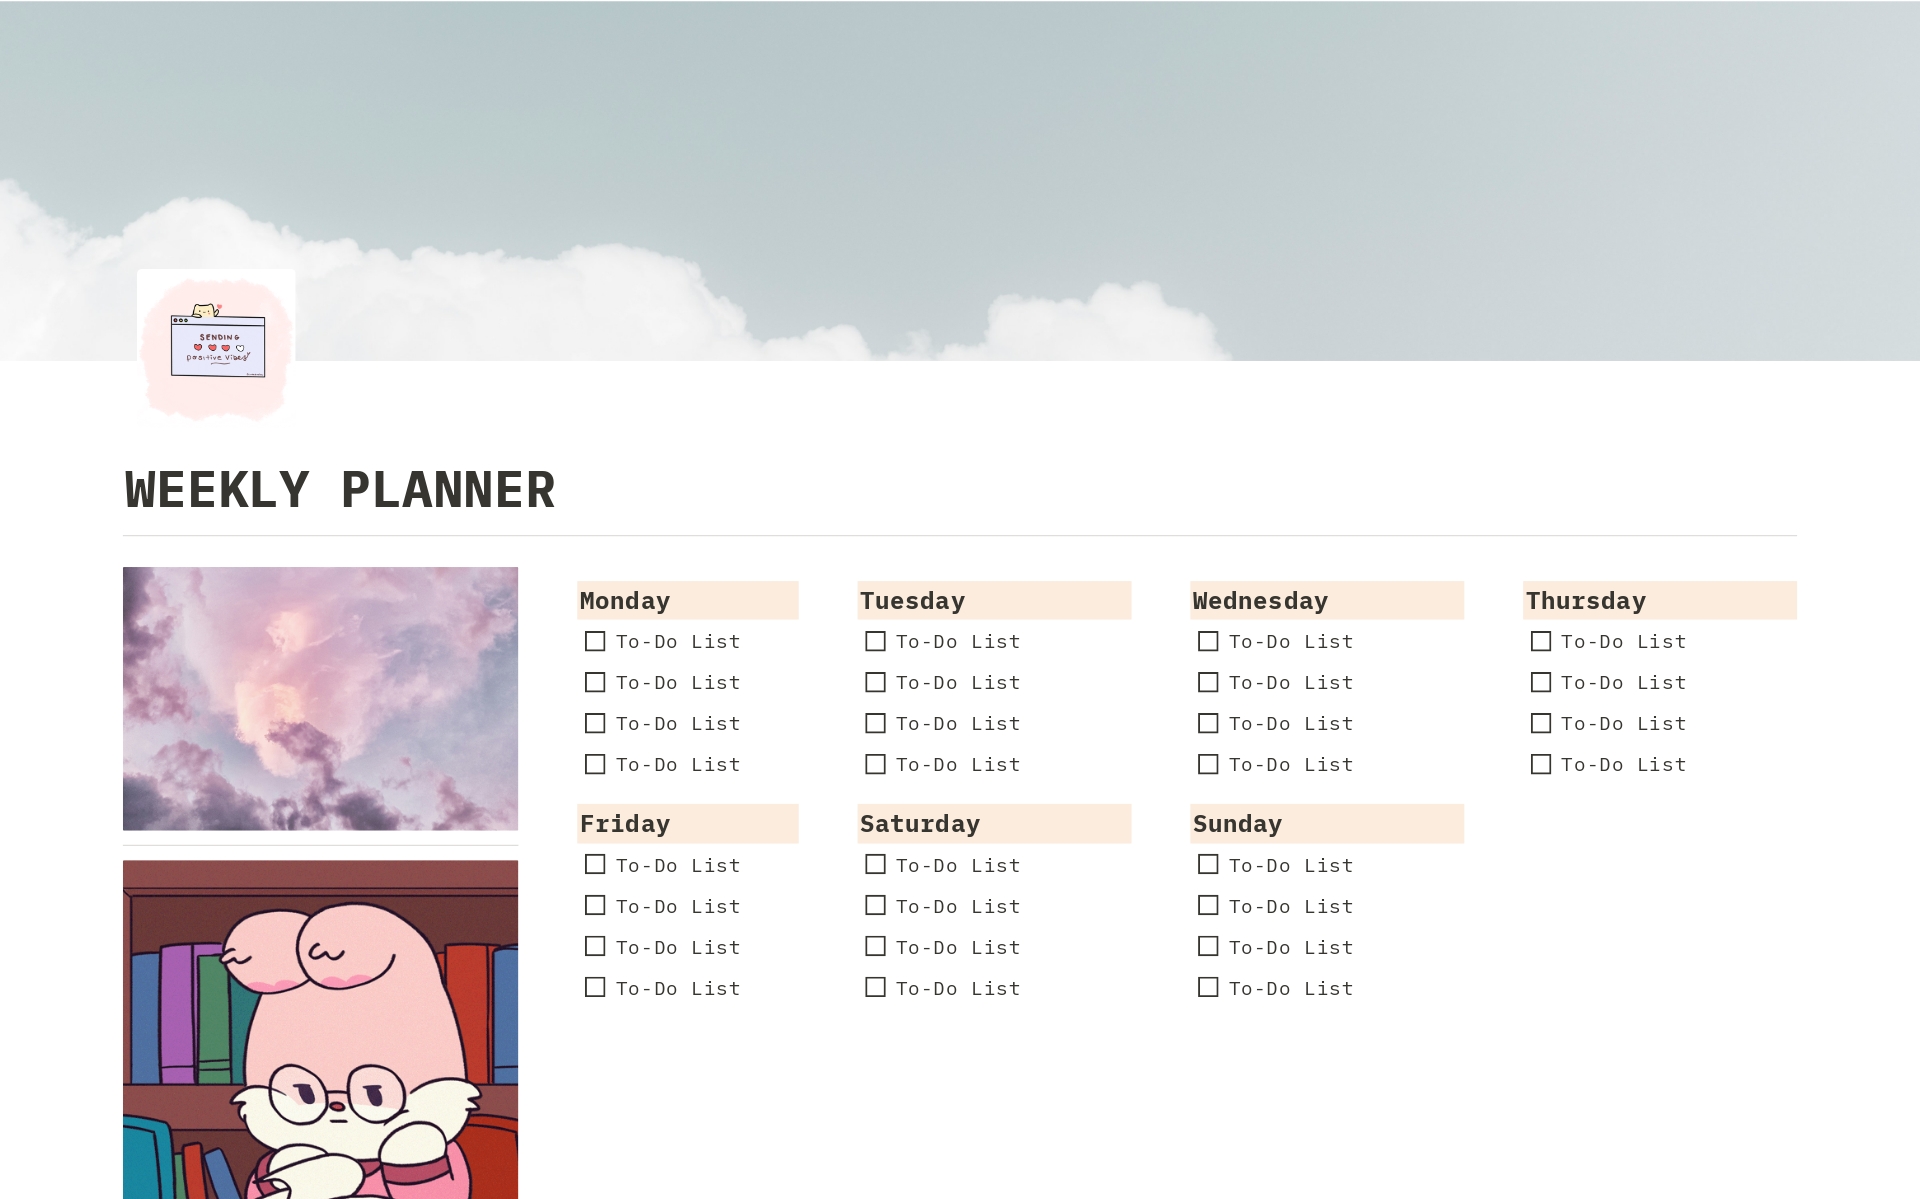 Introducing our Weekly Planner Notion Template: the ultimate tool to streamline your week, boost productivity, and cultivate a sense of clarity and organization in your life.